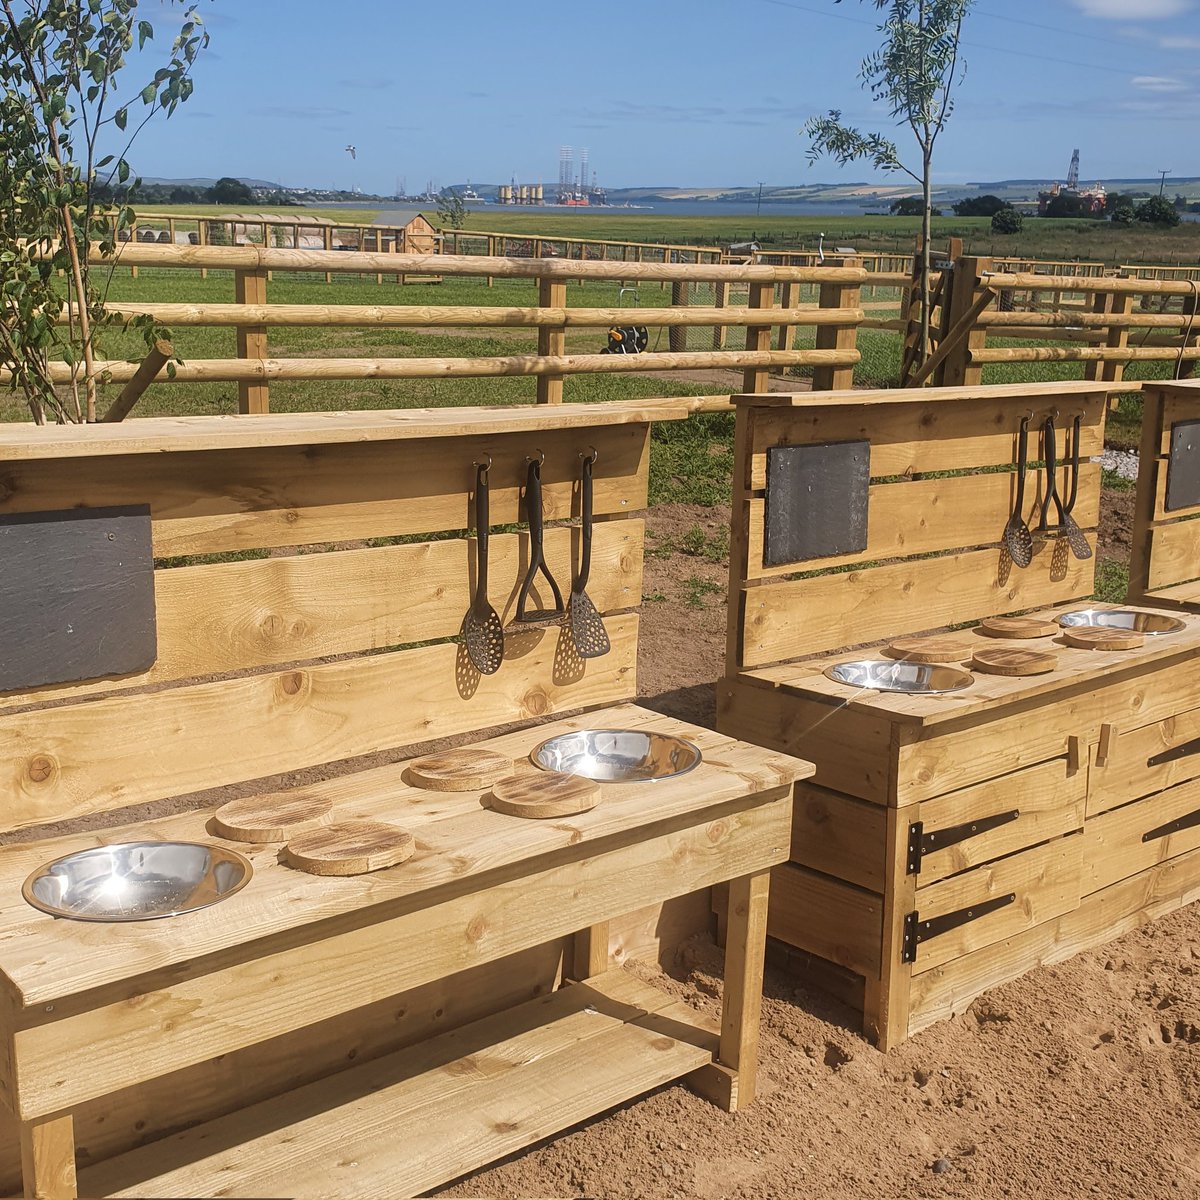 Cooking with a view ☀️🍳🍔
.
#handmade #mudkitchen #sandpit #locallysourced #comingsoon #summer2021